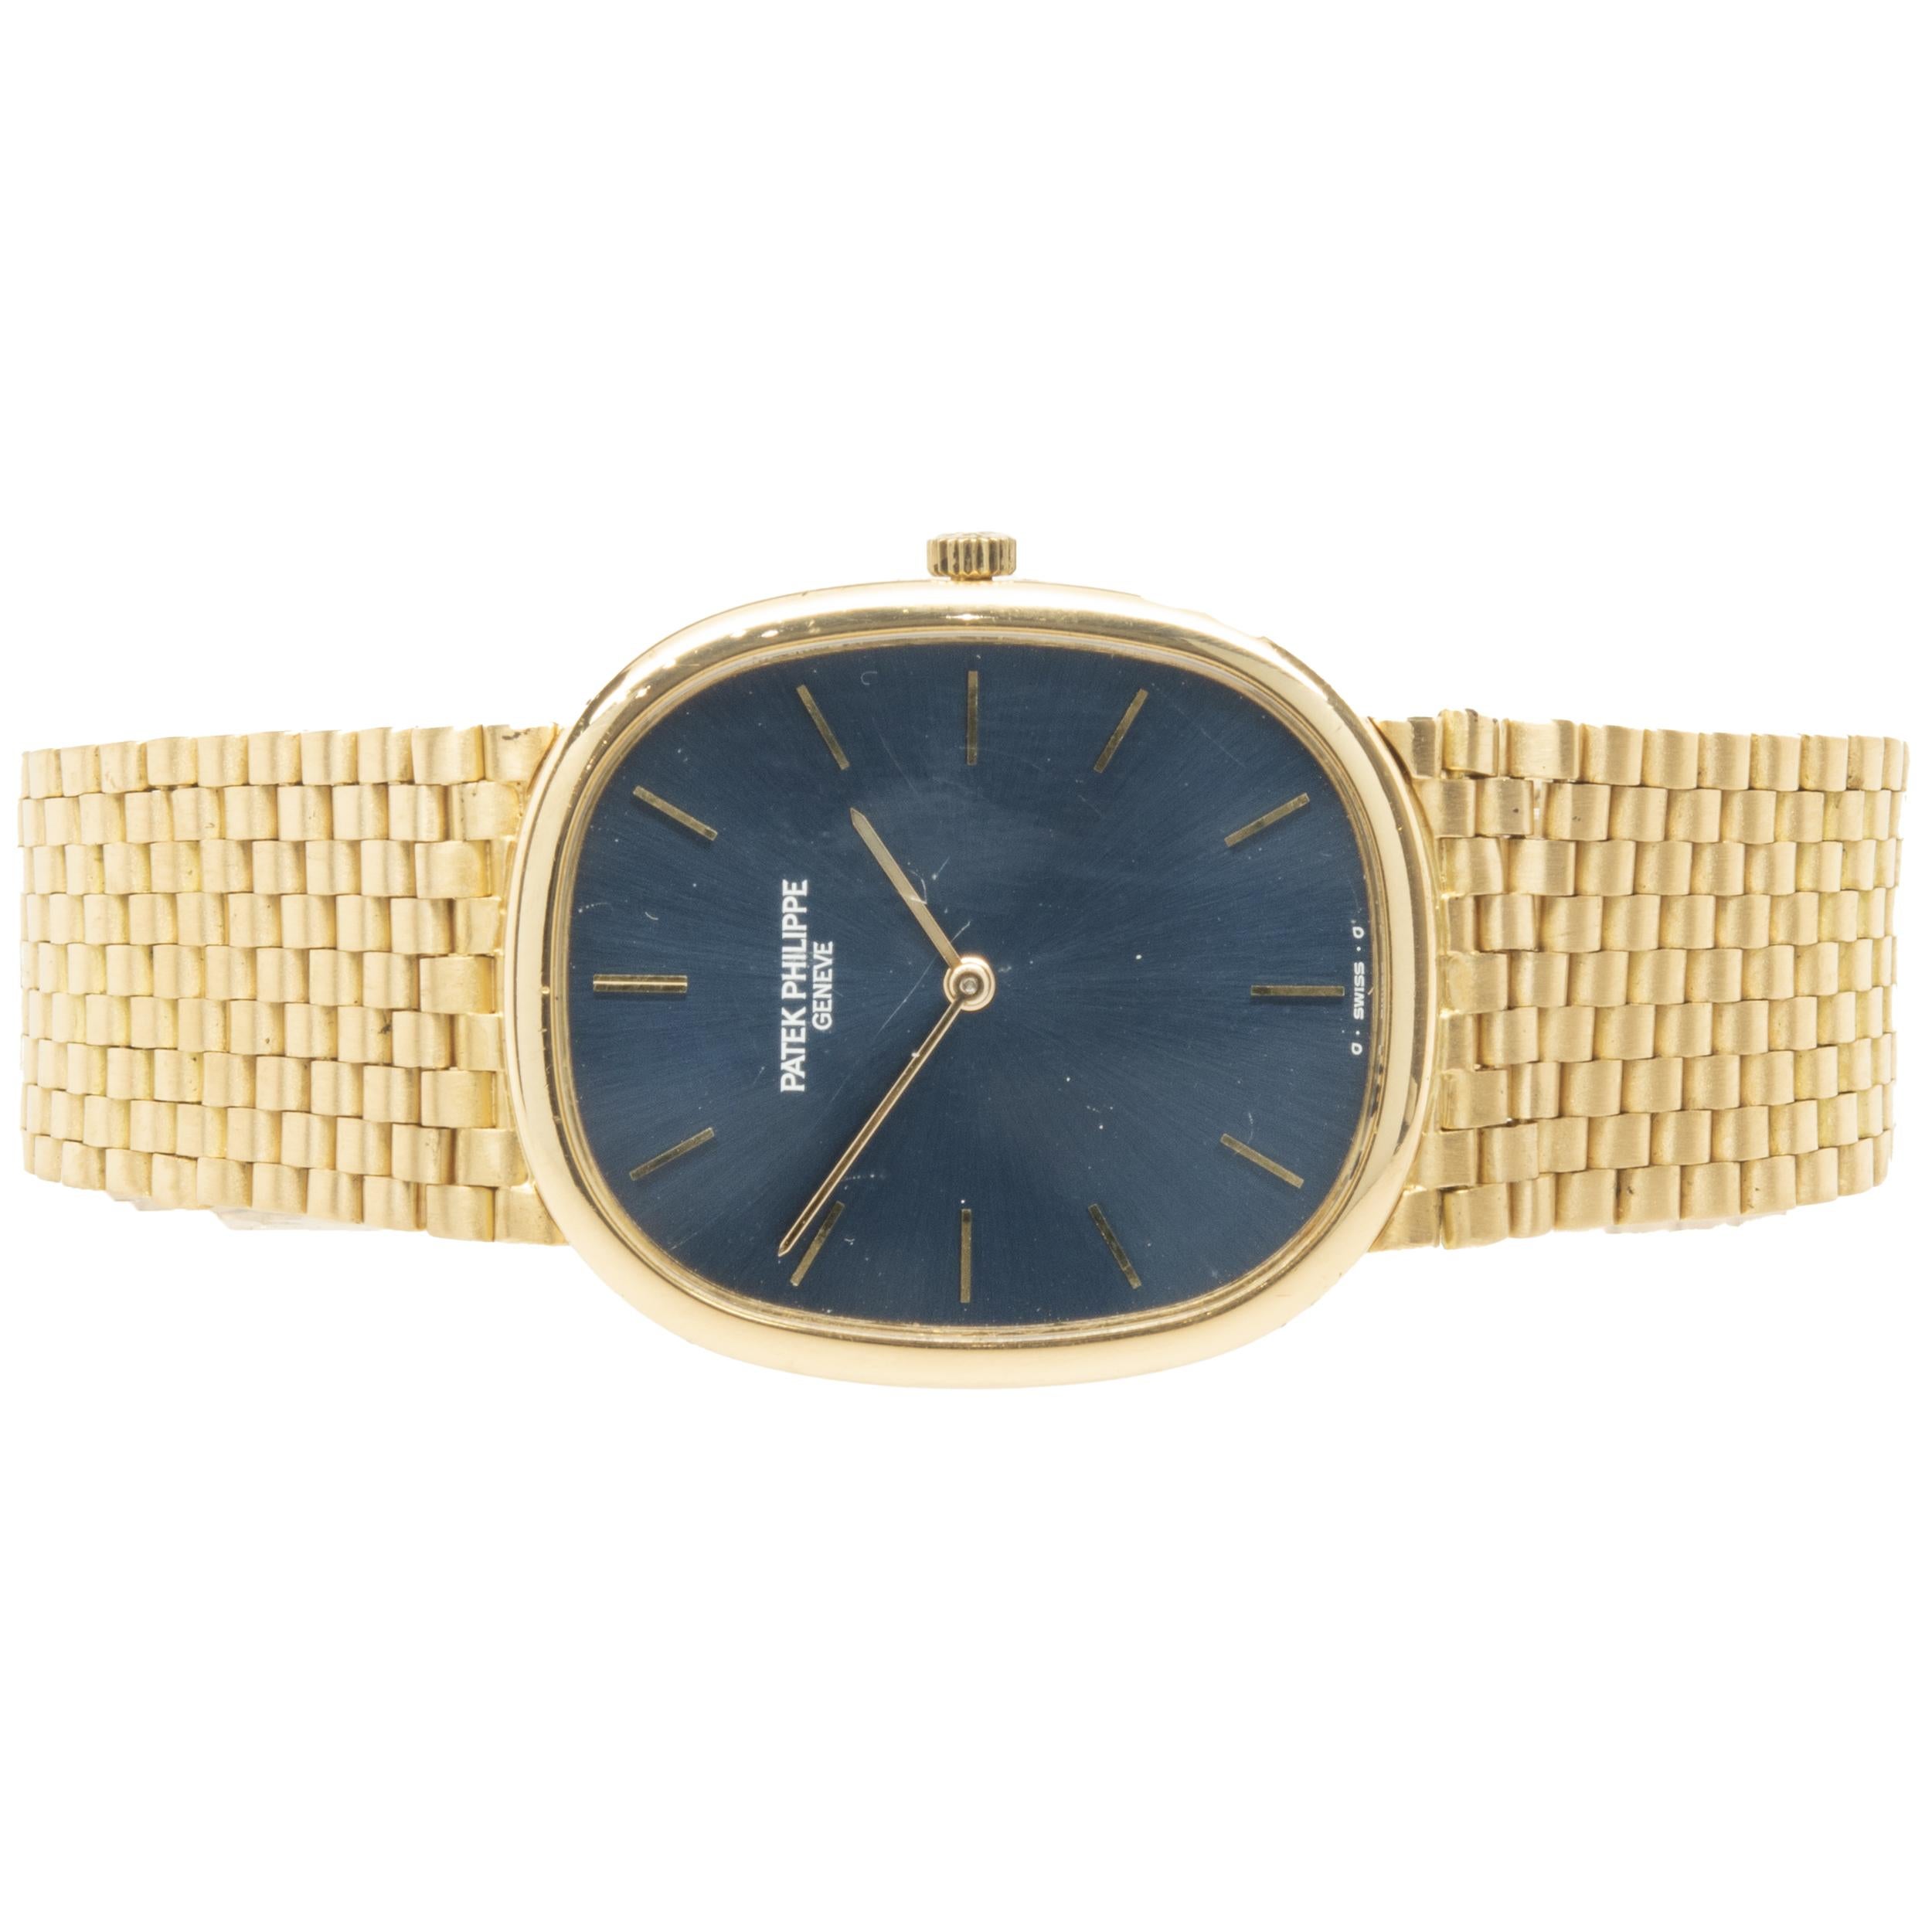 Movement: automatic
Function: hours, minutes, seconds 
Case: 36x 31mm 18K yellow gold ellipse case, smooth bezel, sapphire crystal, push pull crown
Band: 18K yellow gold Patek Philippe mesh bracelet
Dial: blue stick 
Reference: 3838/1

Complete with